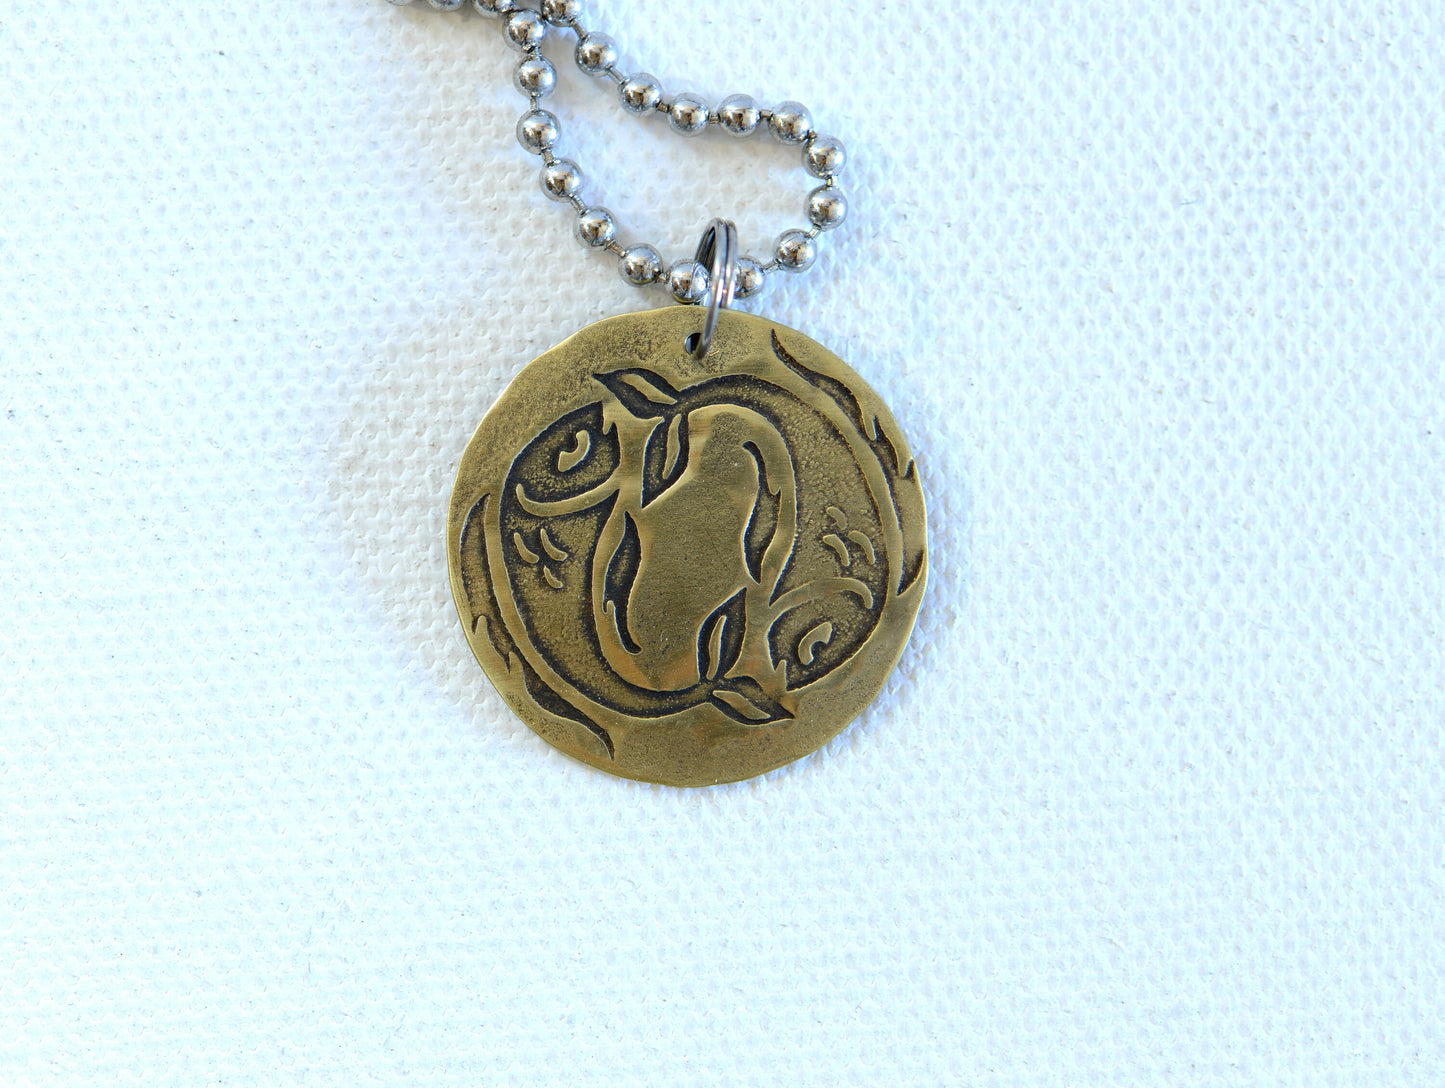 Zodiac charm style necklace shown with Pisces zodiac sign but can be personalized